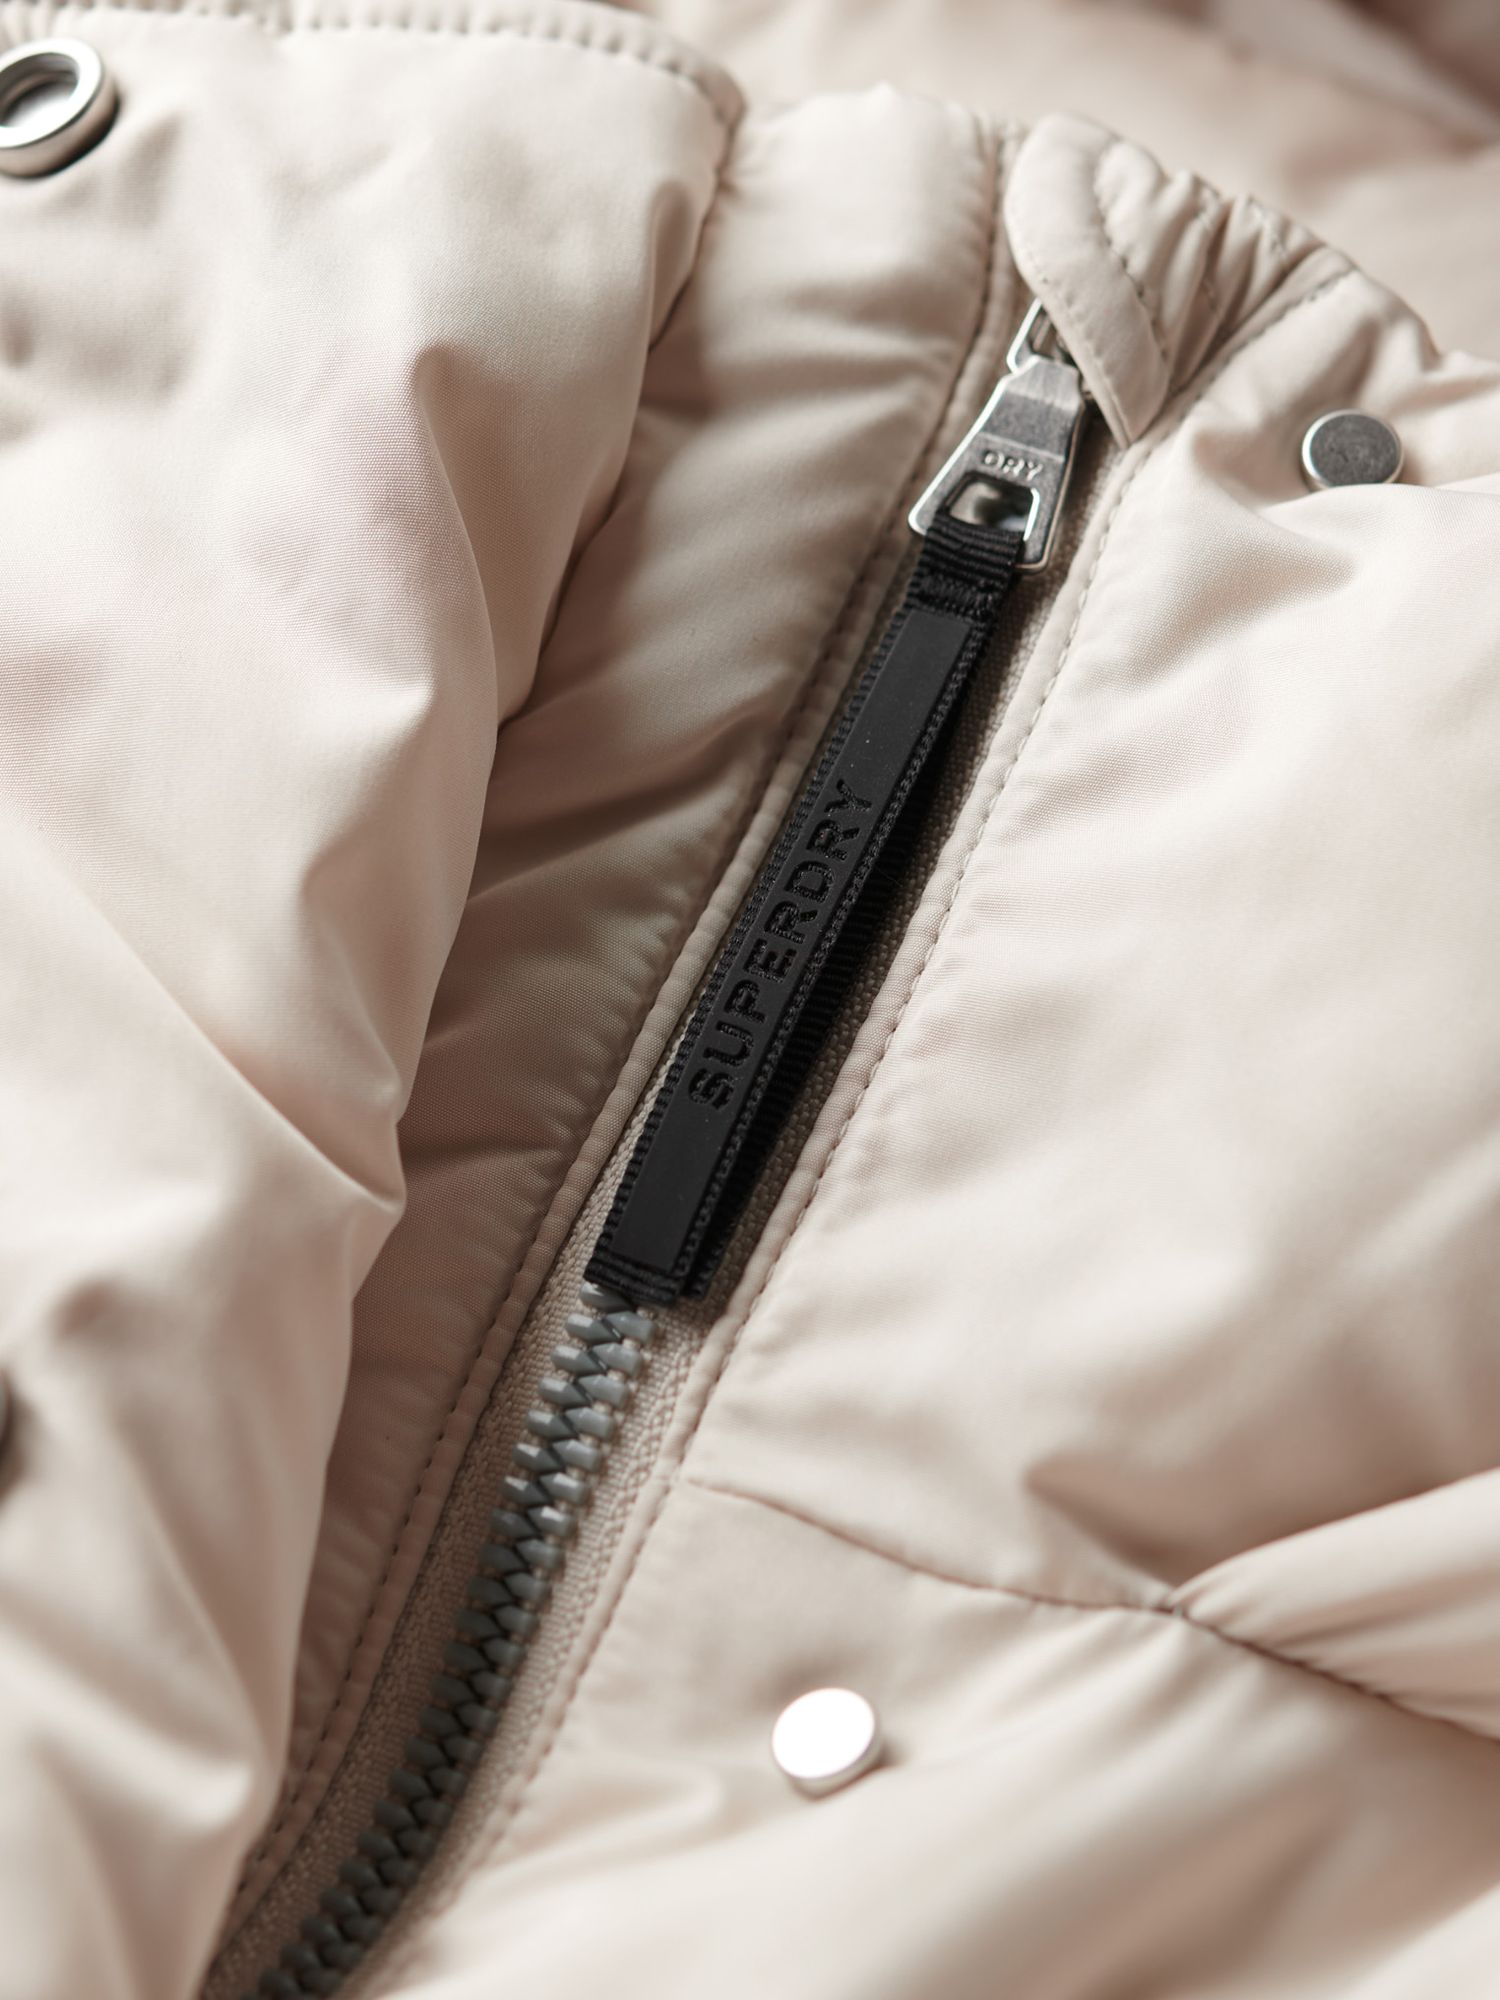 Superdry Hooded Maxi Puffer Coat, Rainy Day Grey at John Lewis & Partners